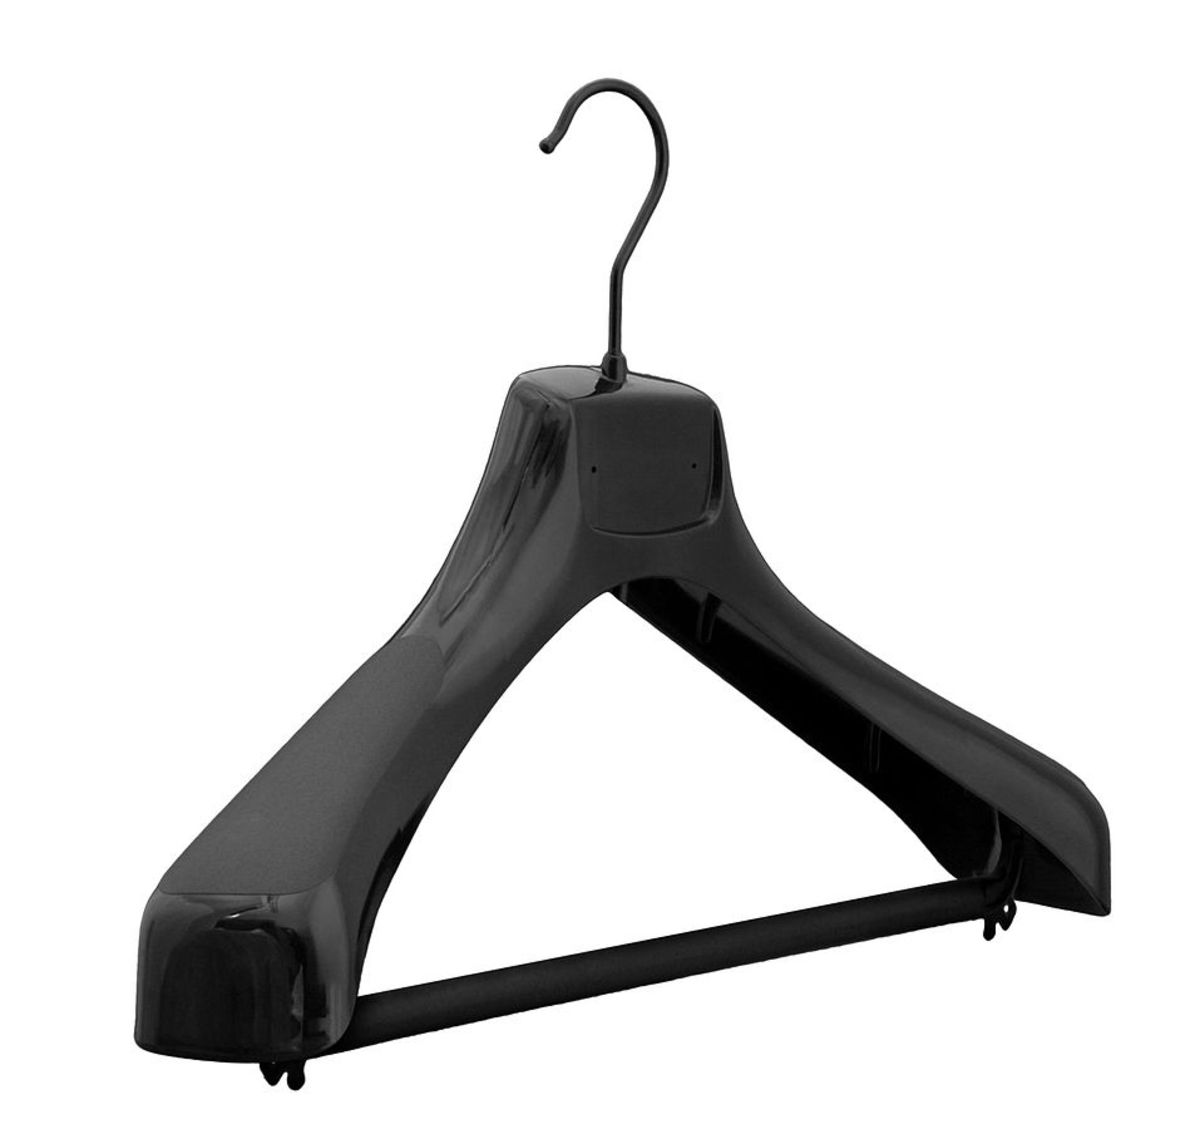  Regular clothes hangers, like this one, can be dangerous. Remember that I said this to you on Jan. 22, 2018.